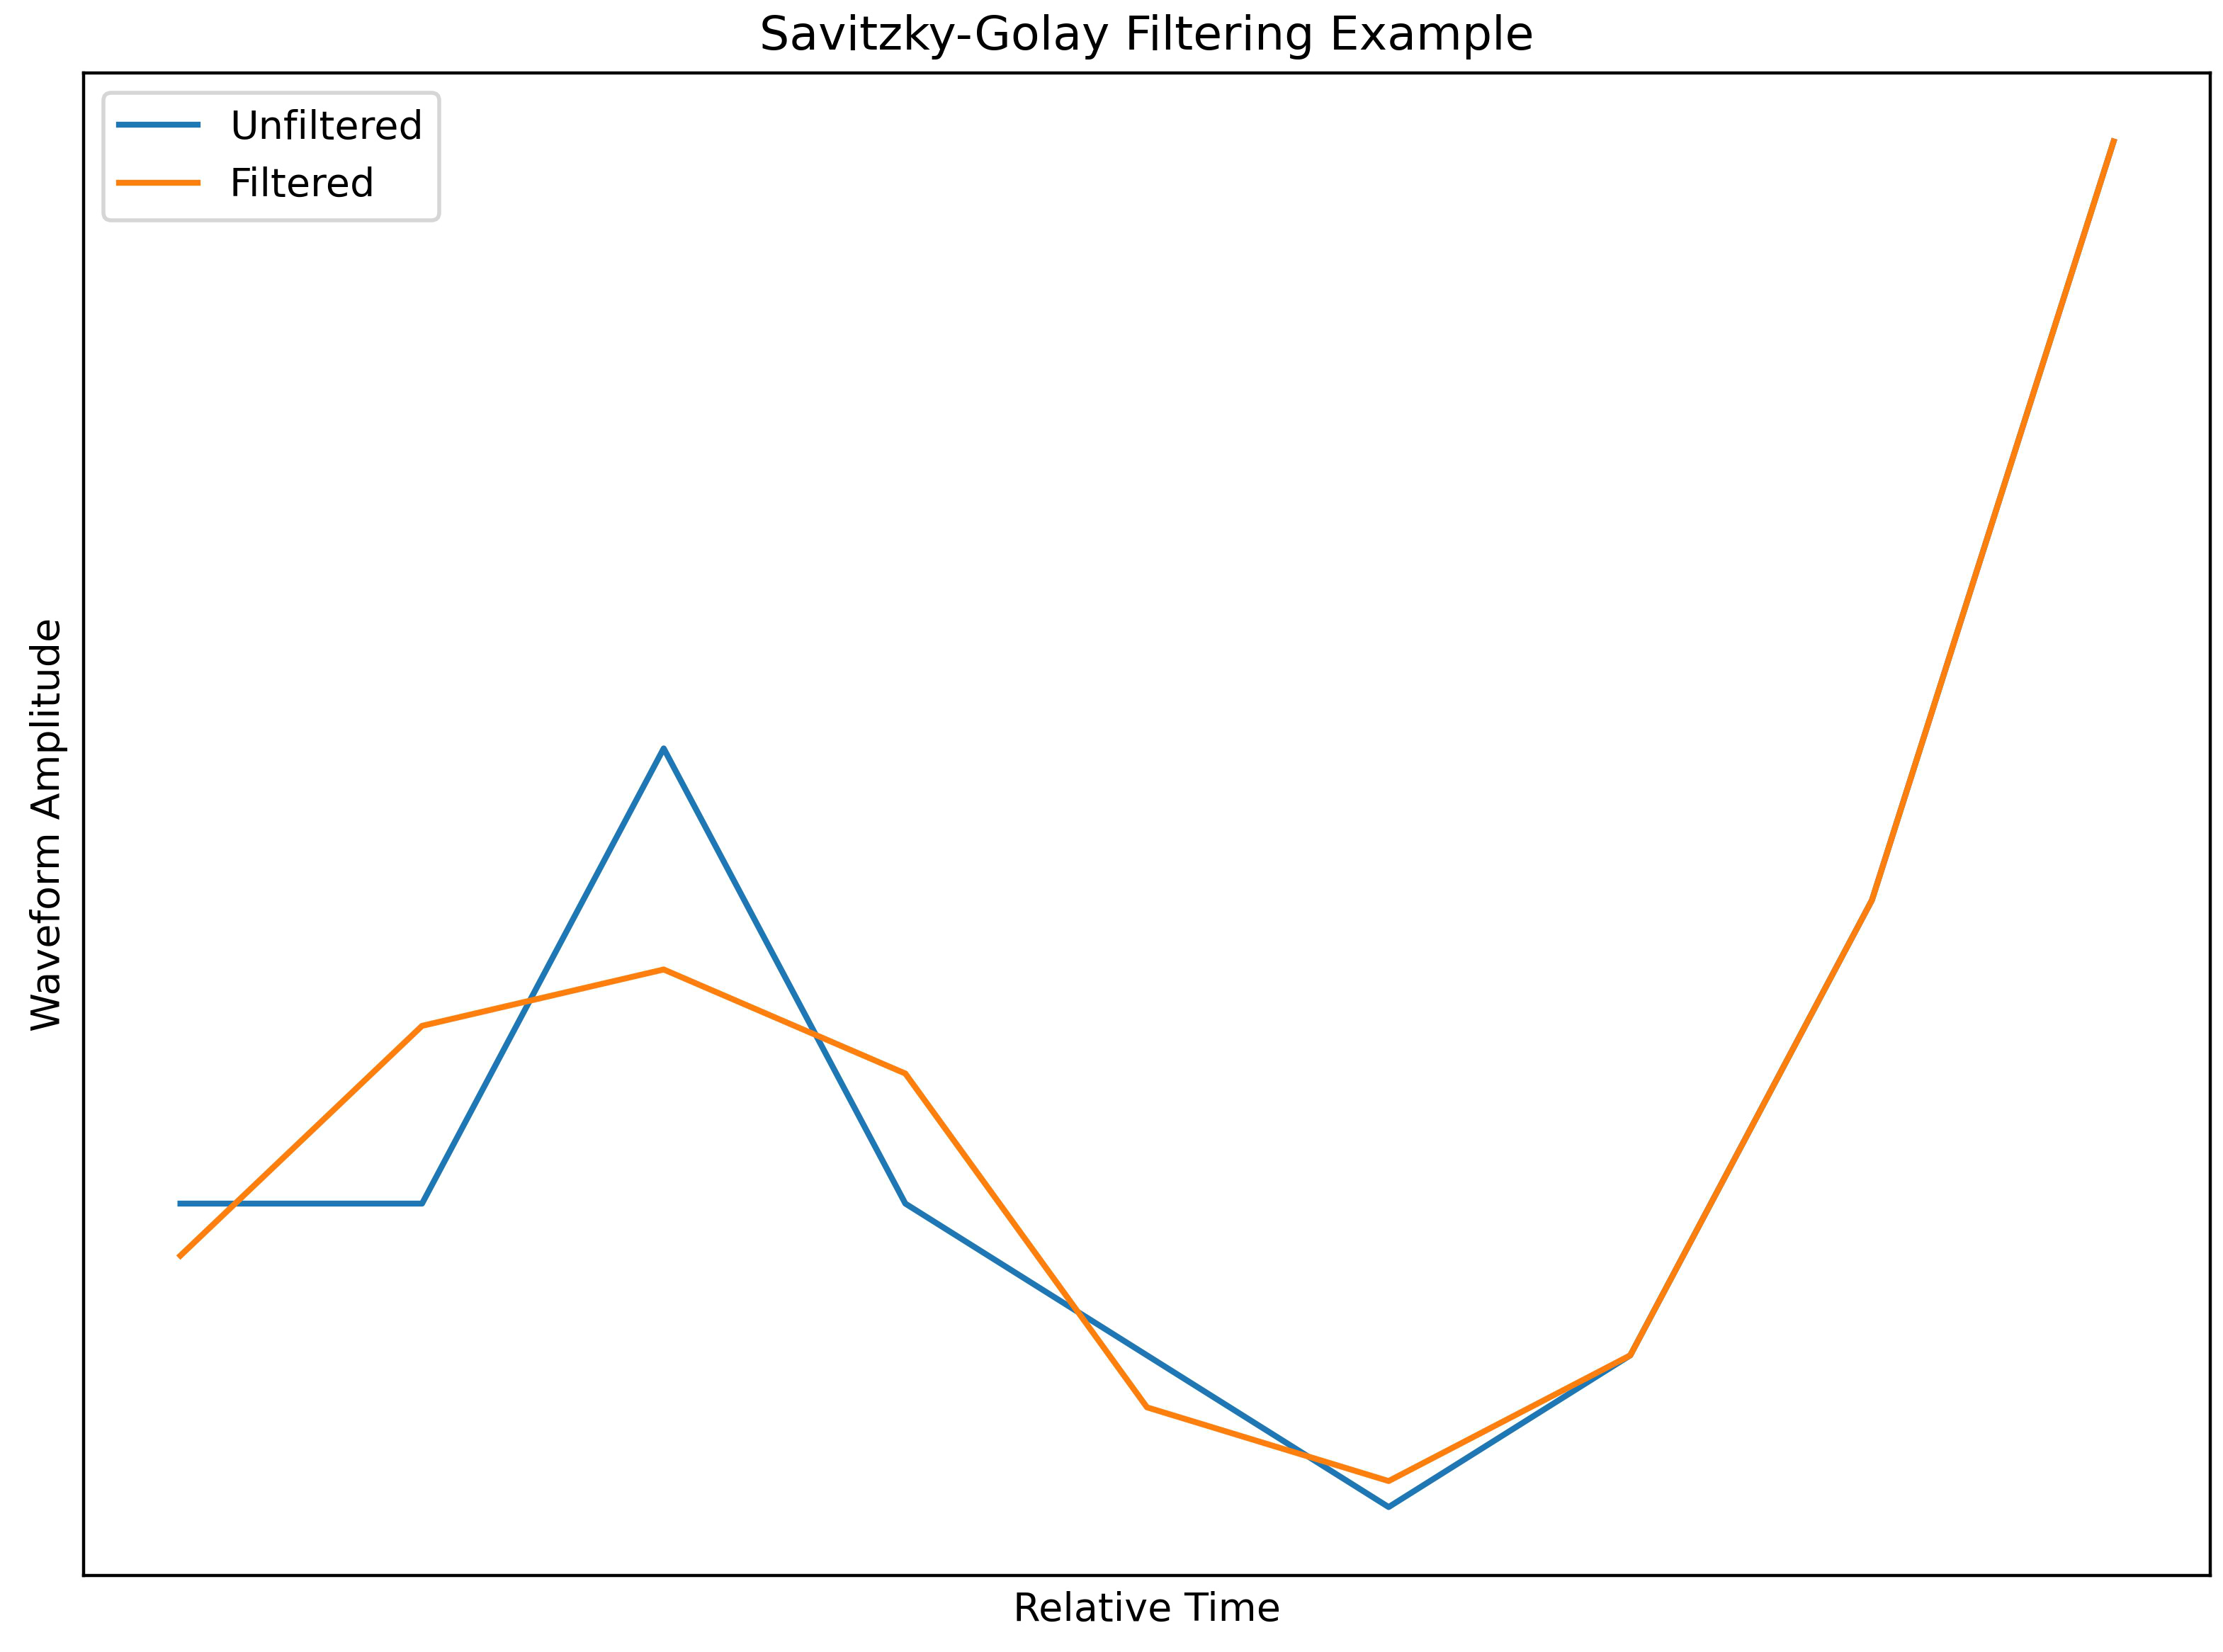 Savitzky-Golay filtering to remove noise.